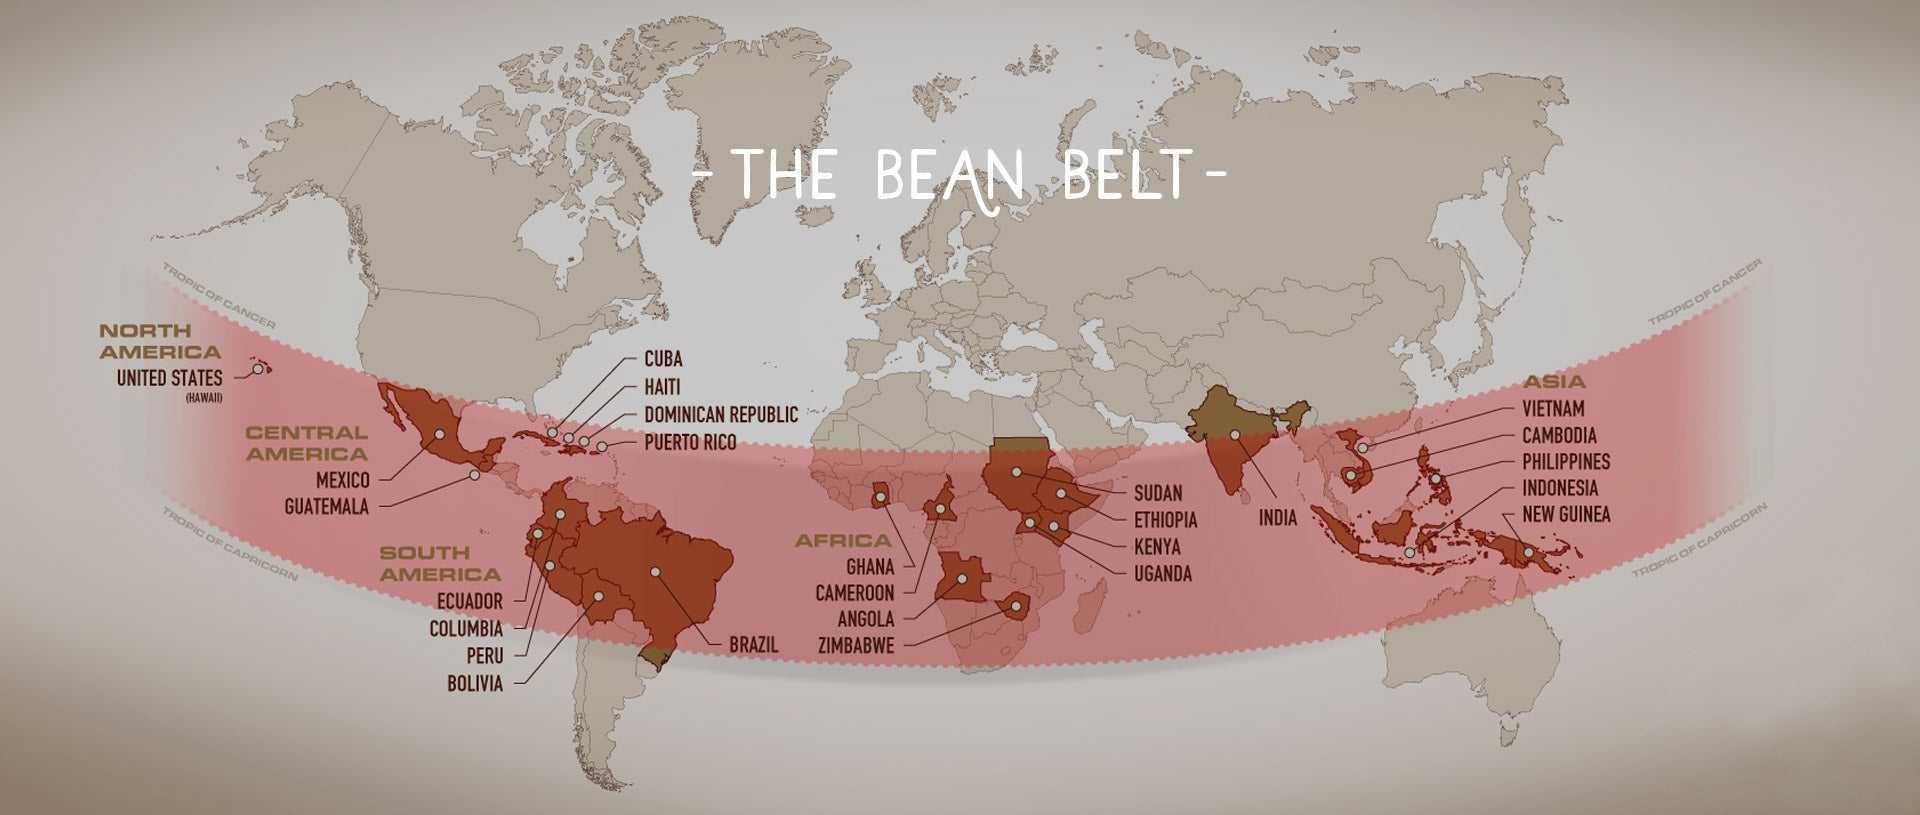 The Bean Belt - Real Good Coffee Co - Recyclable K Cups ...